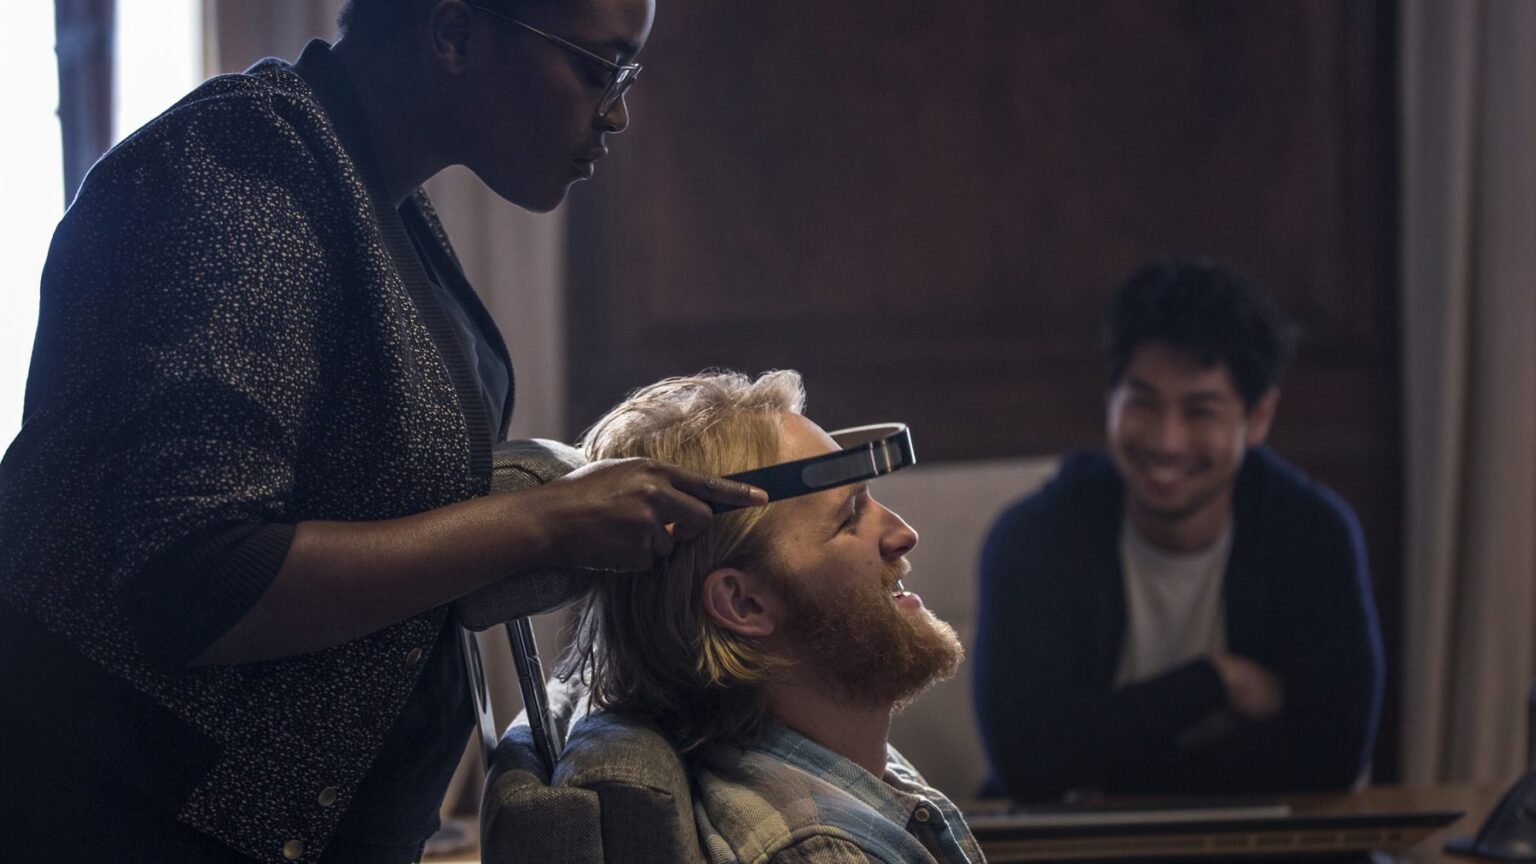 Sometimes, reality is stranger than fiction. Discover if Microsoft's new technology is straight out of a 'Black Mirror' episode right here.